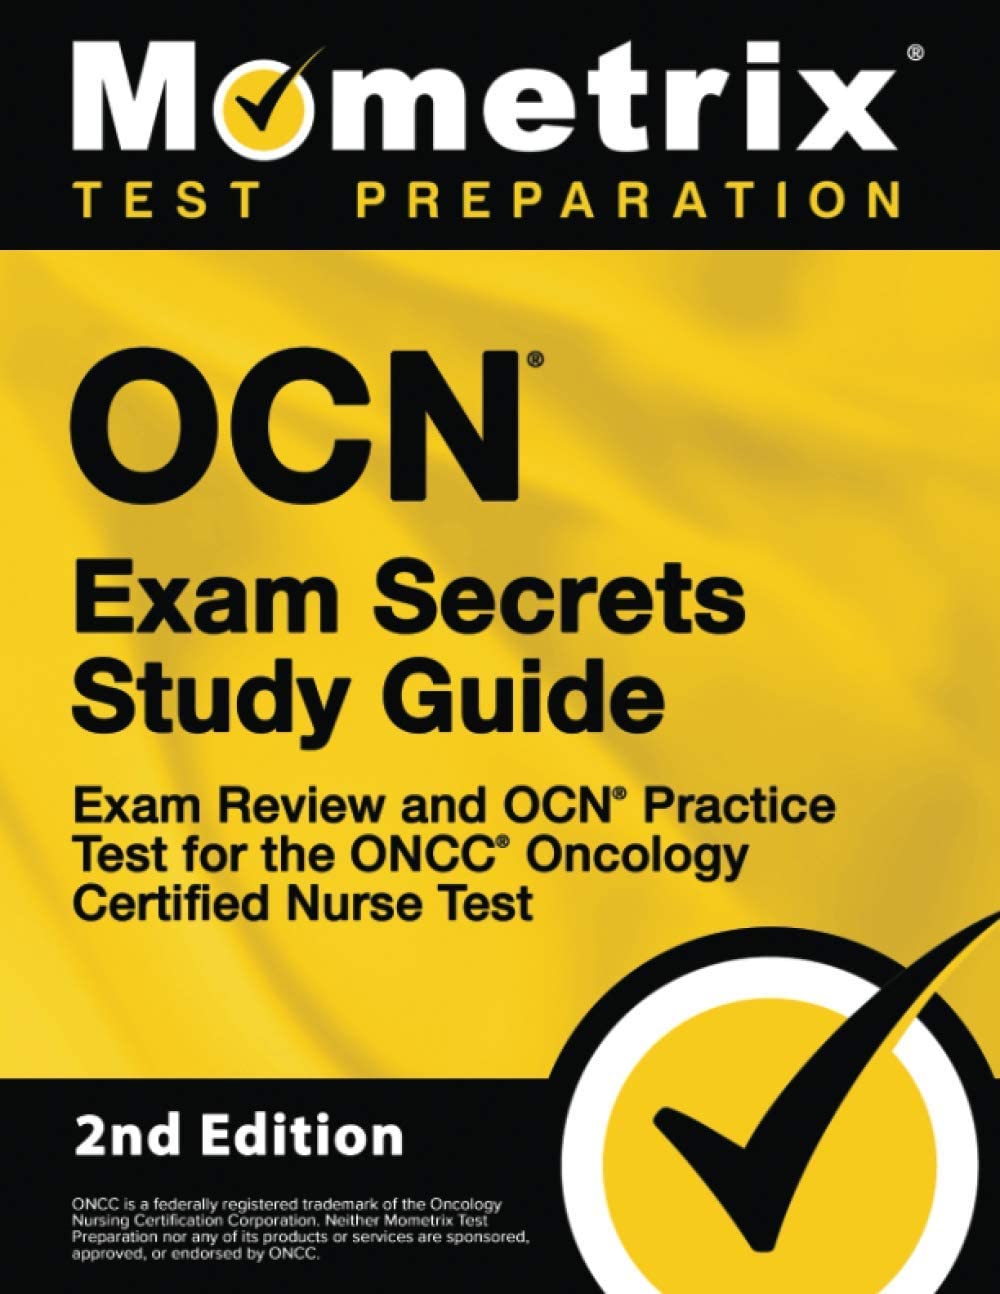 OCN Exam Secrets Study Guide – Exam Review and OCN Practice Test for the ONCC Oncology Certified Nurse Test: [2nd Edition] (Mometrix Test Preparation)